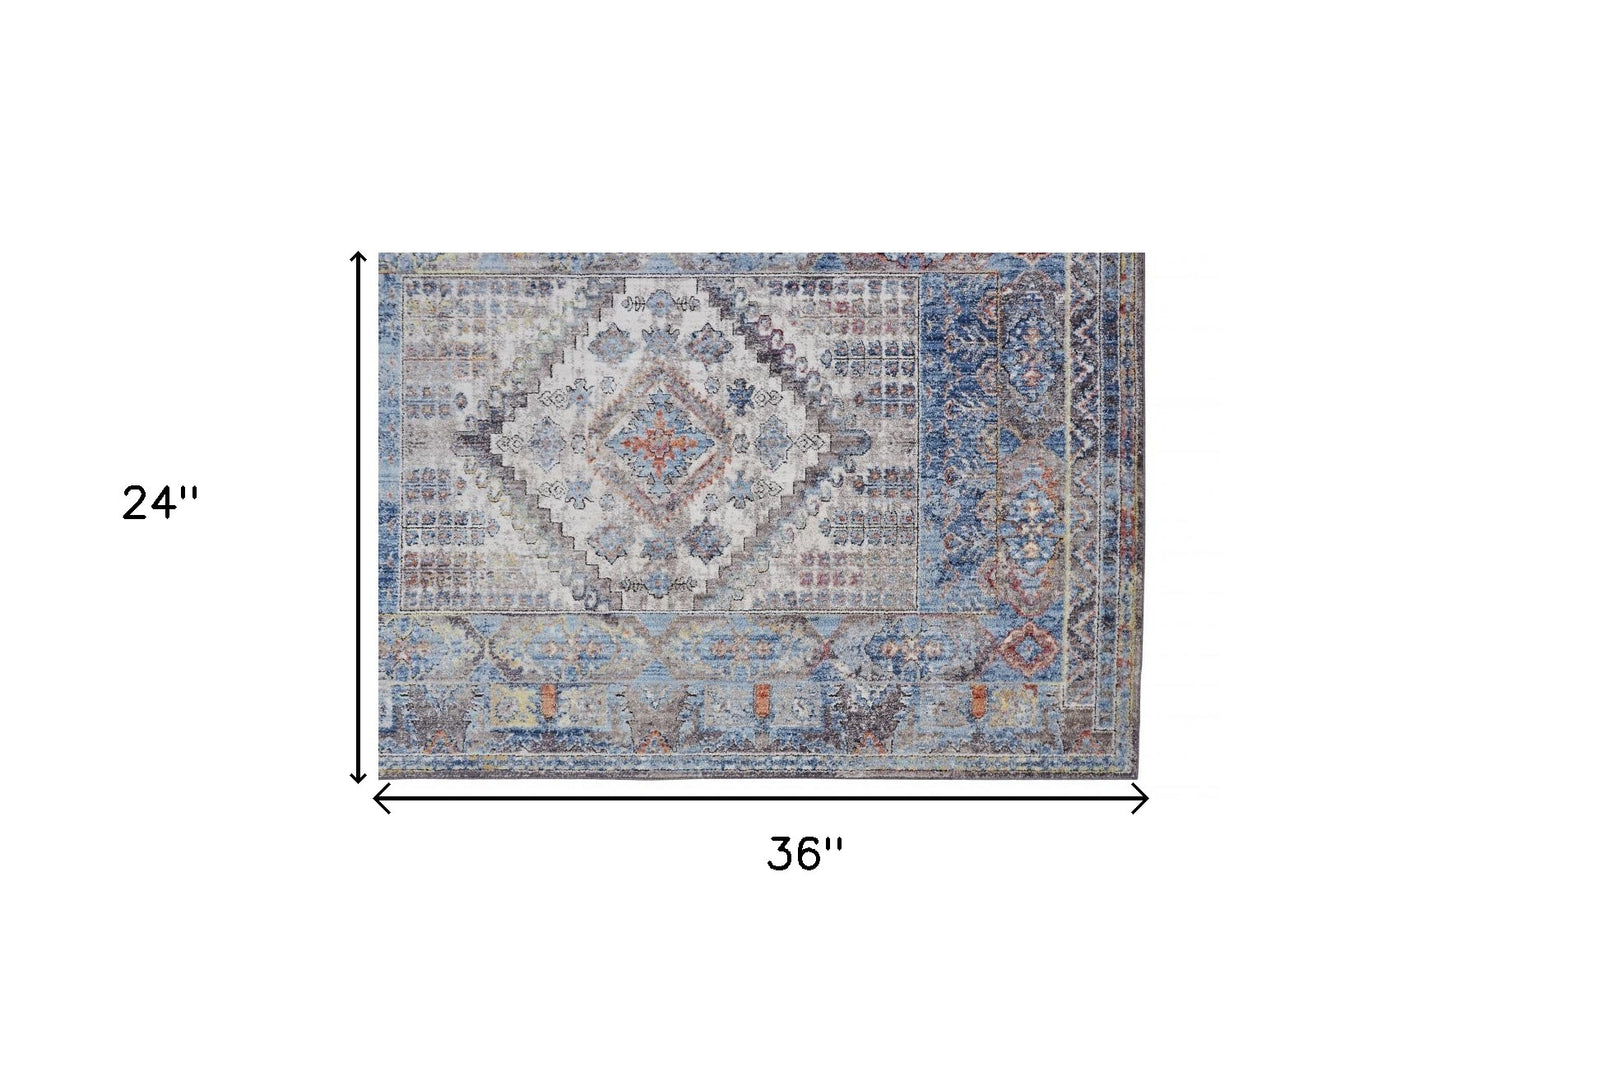 4' X 6' Blue Gray And Ivory Floral Stain Resistant Area Rug